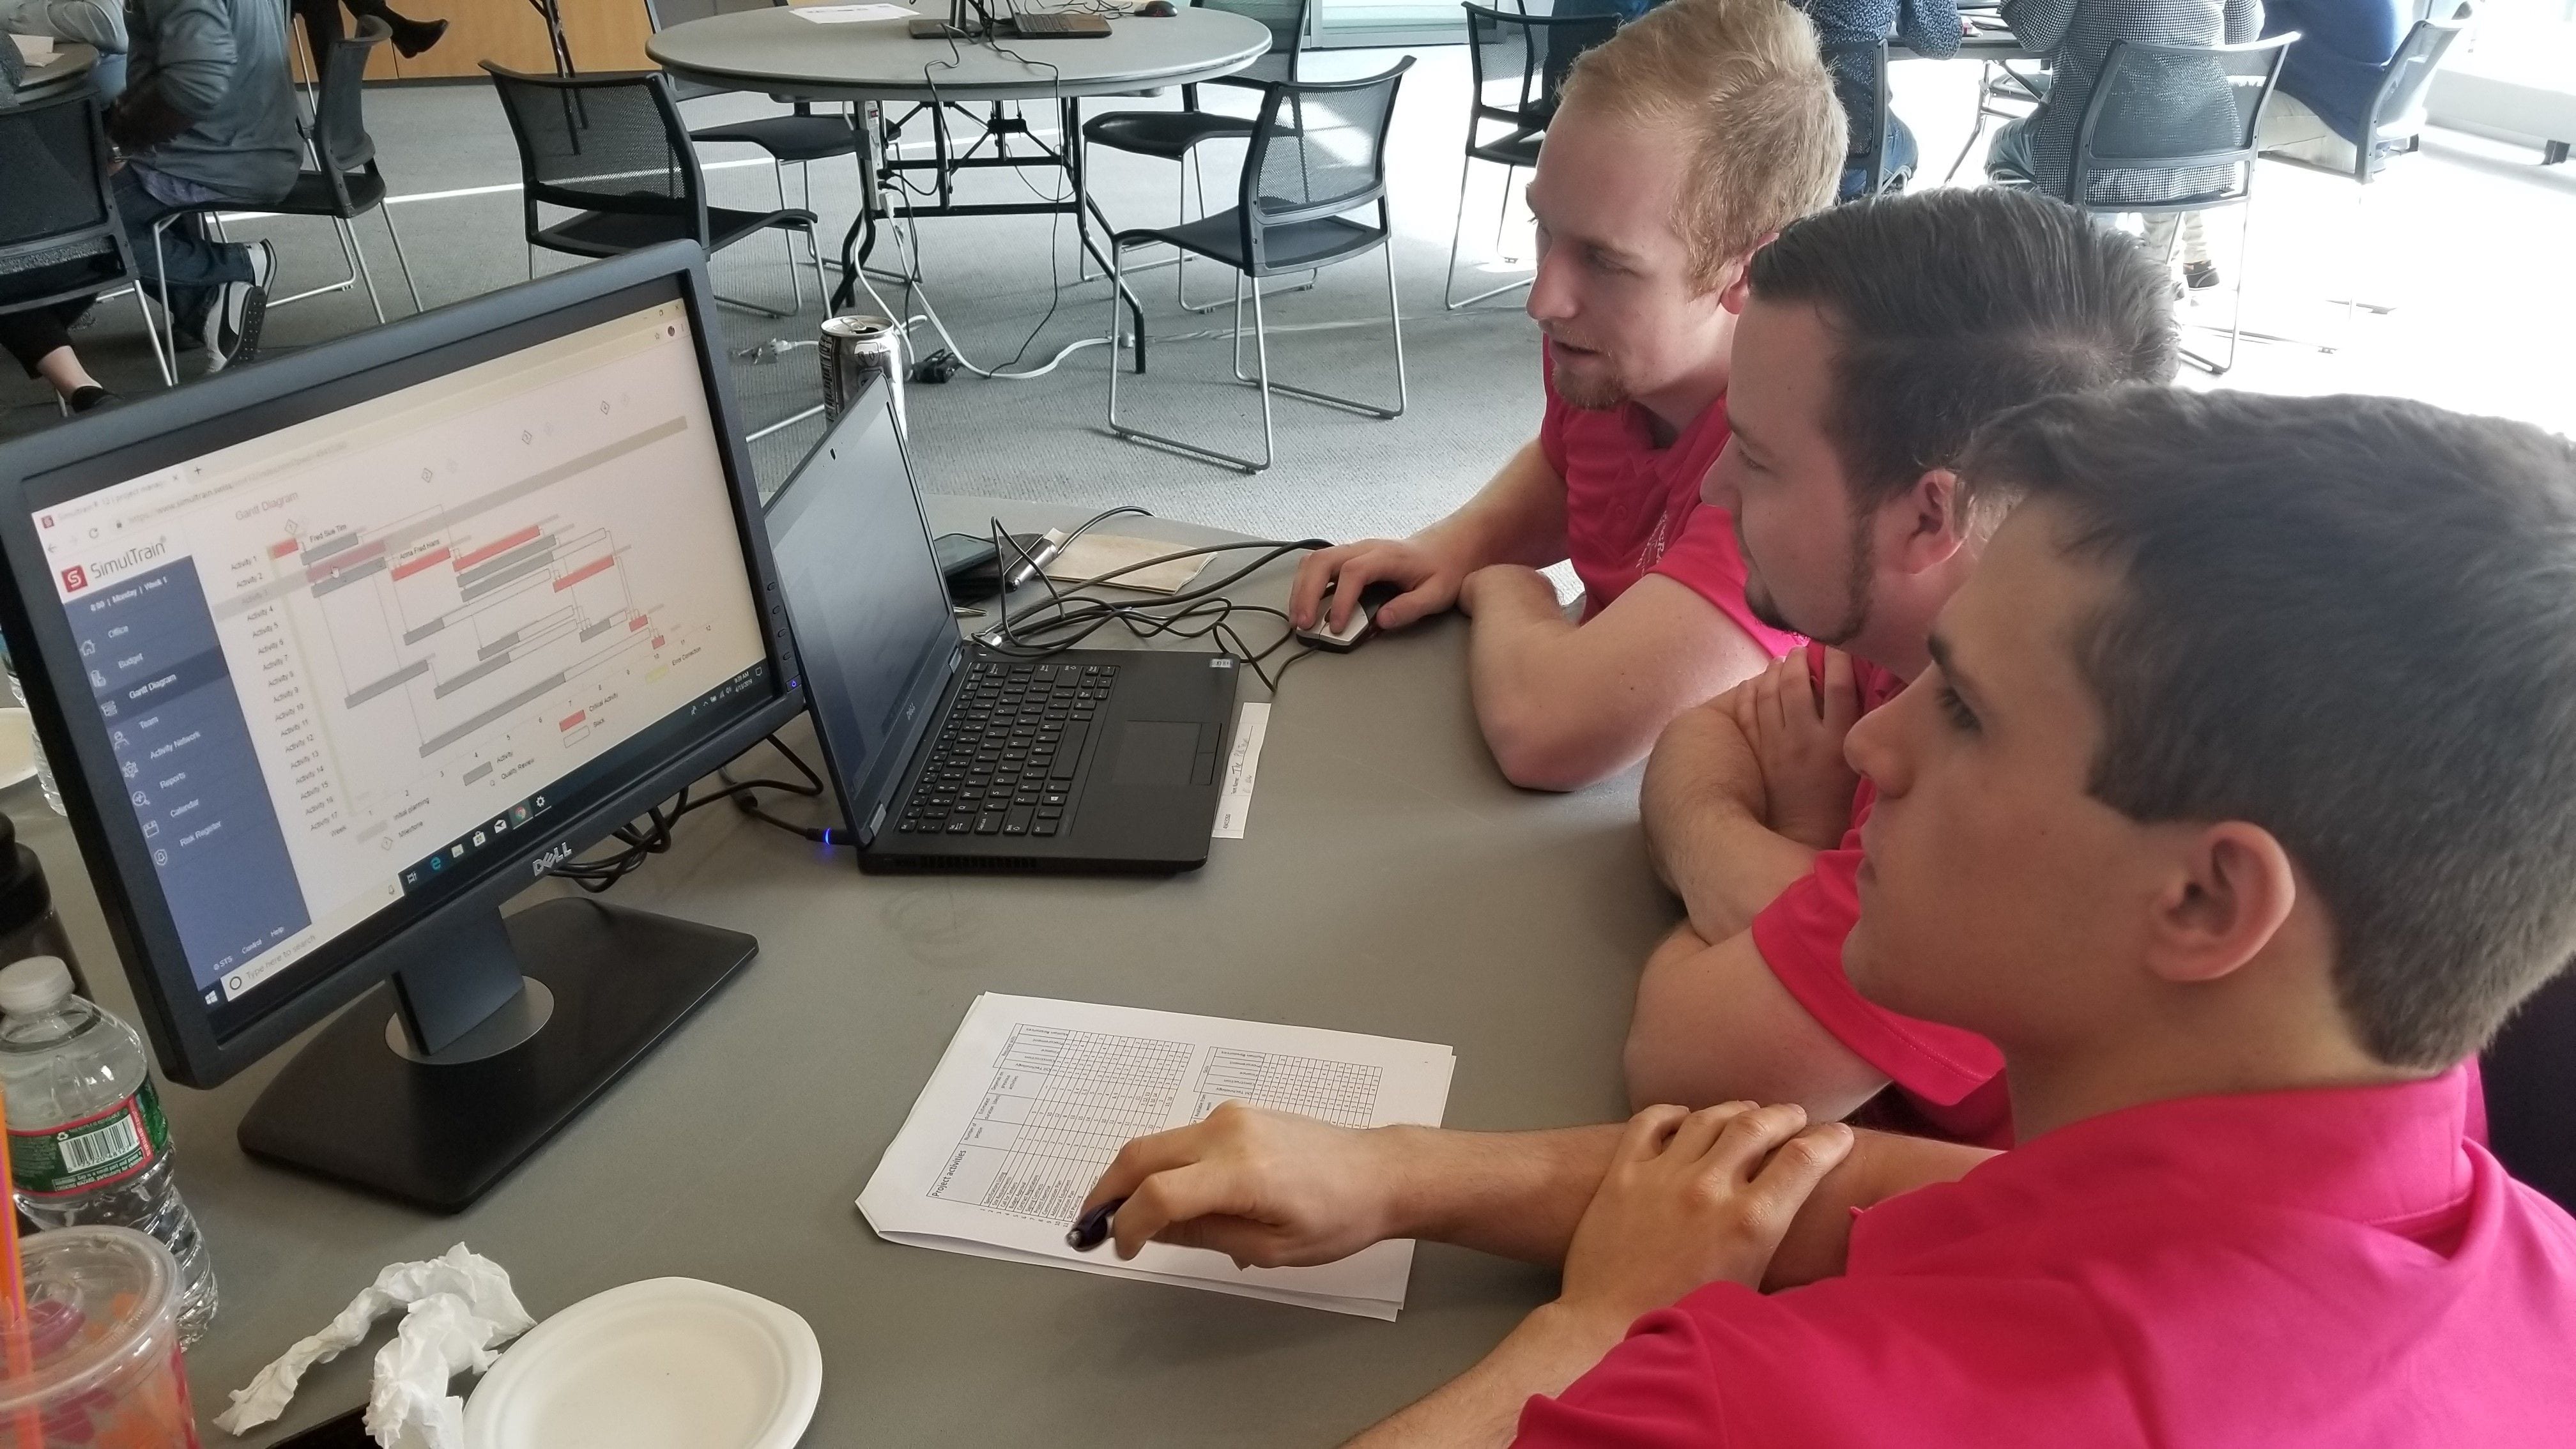 Students solving an issue at a table